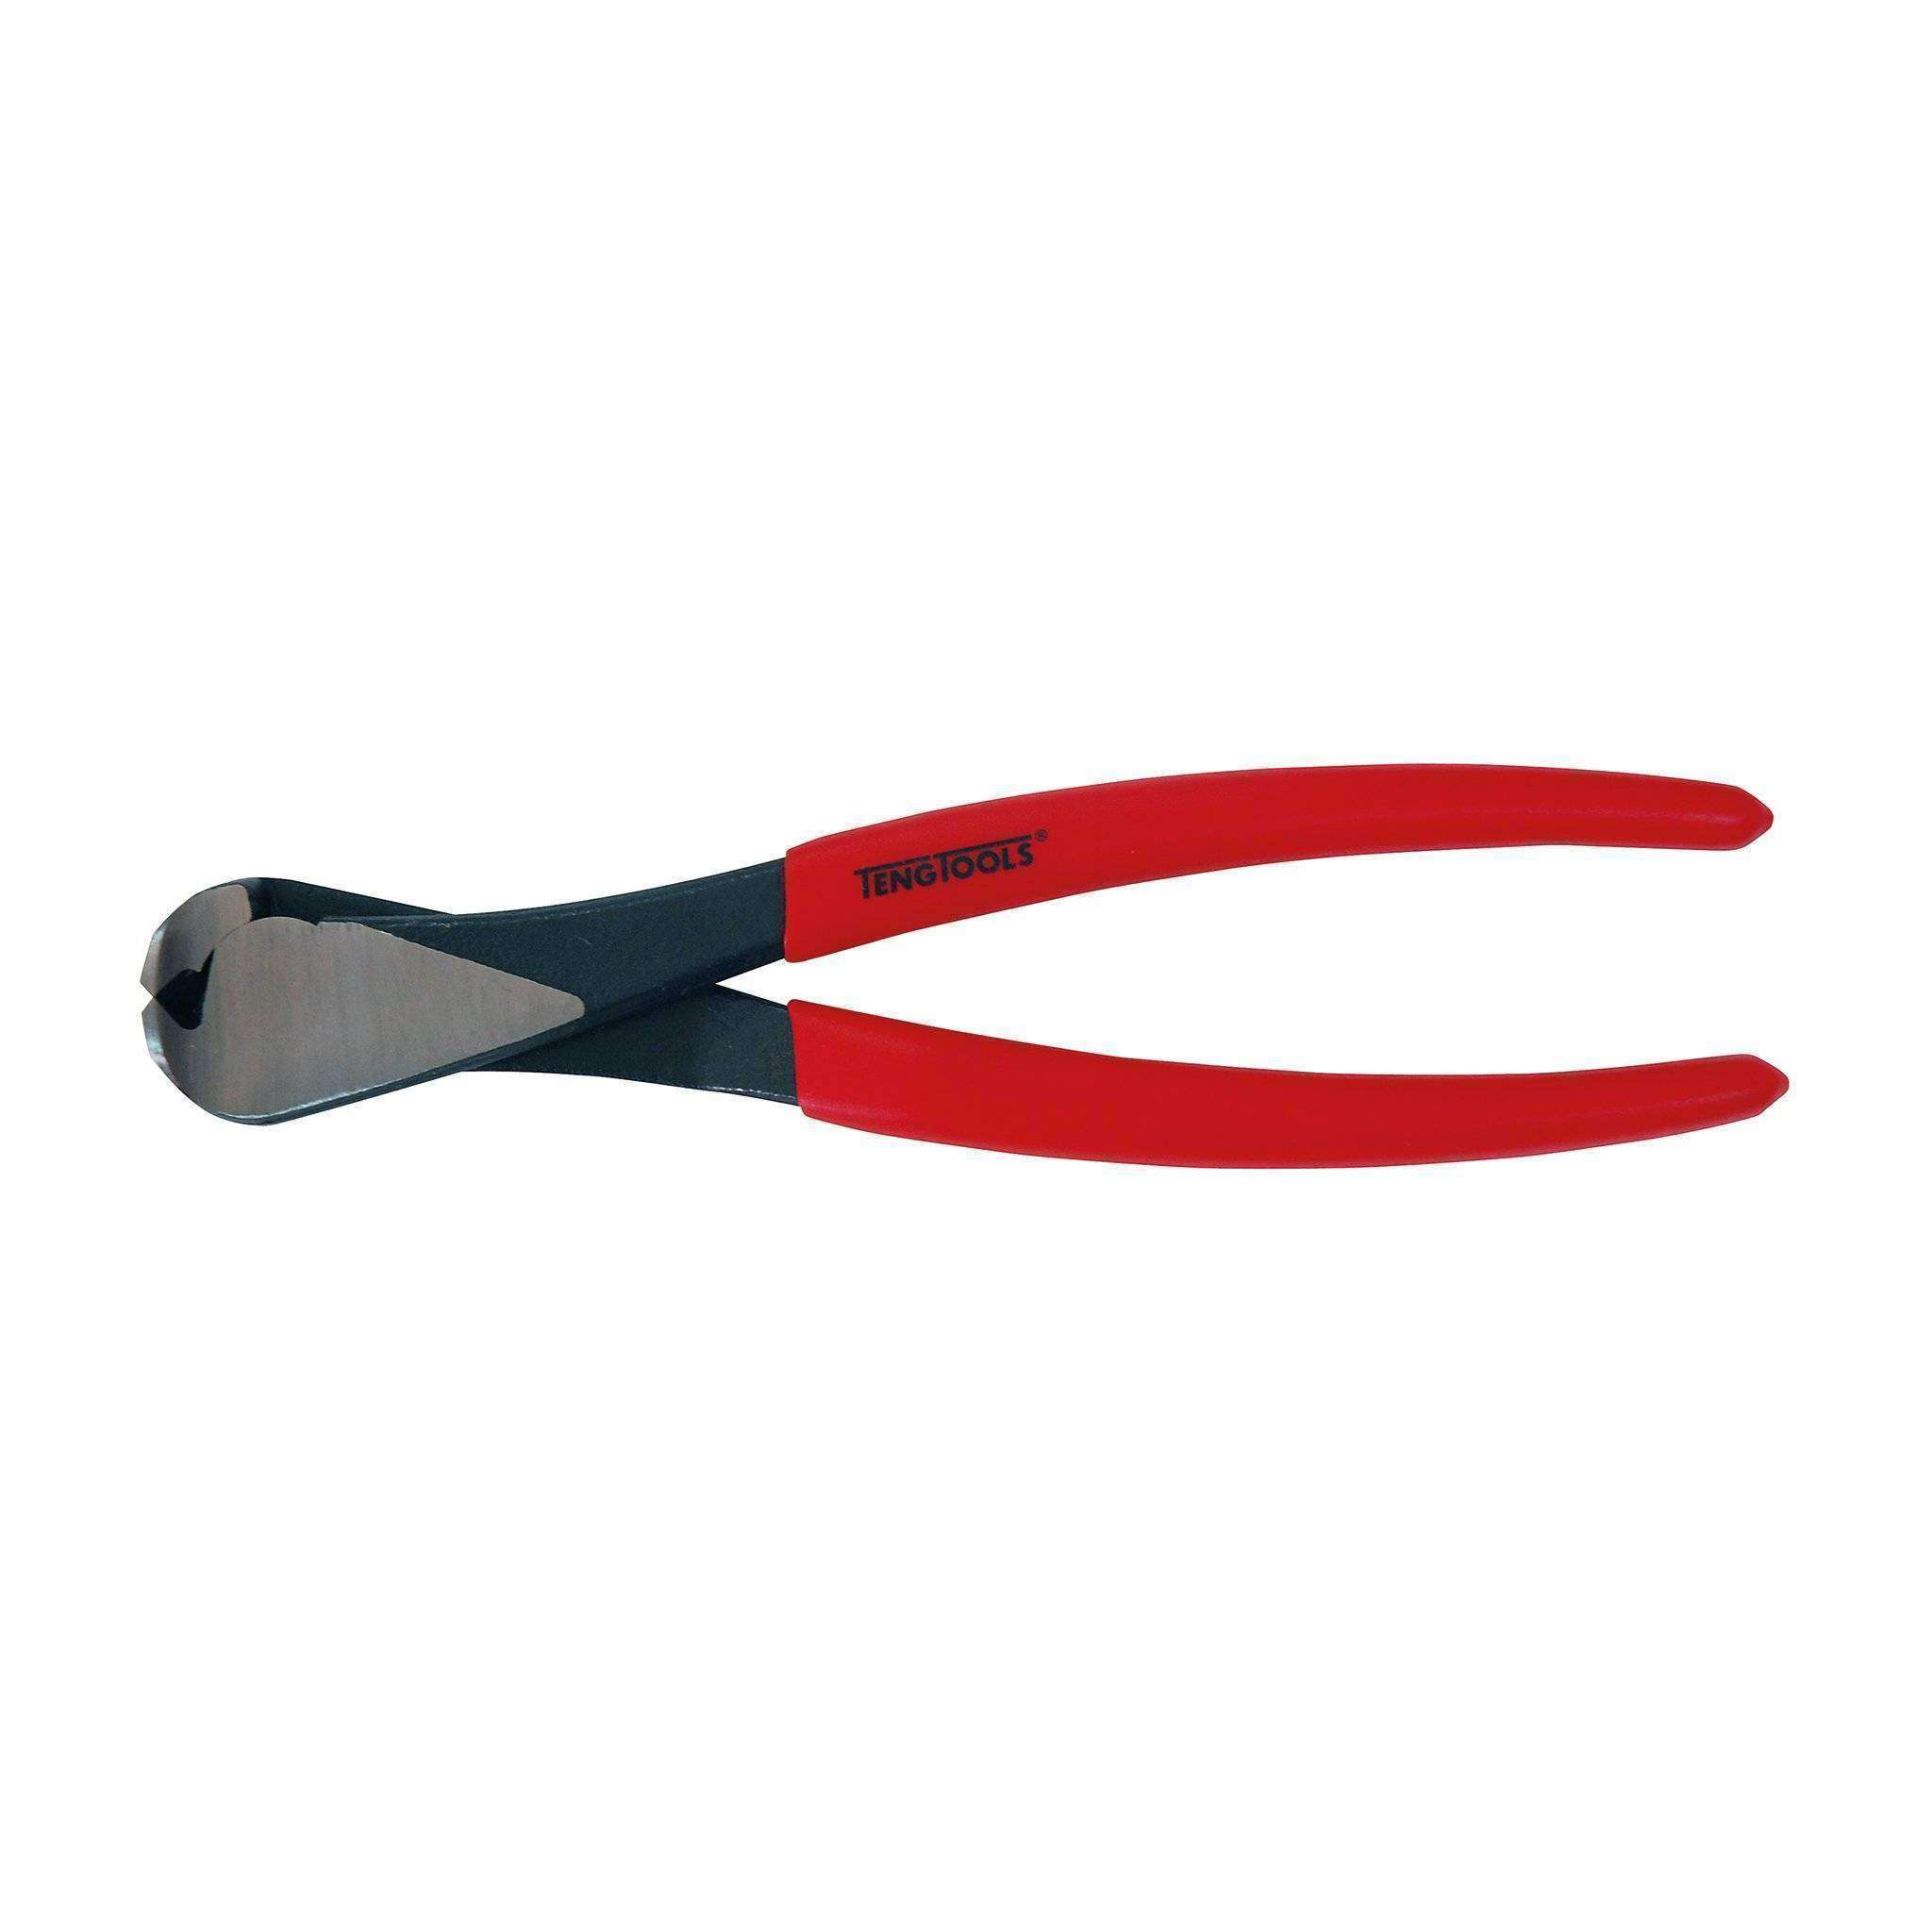 Teng Tools 8 Inch High Leverage End Cutting Nipper Pliers - MB448-8